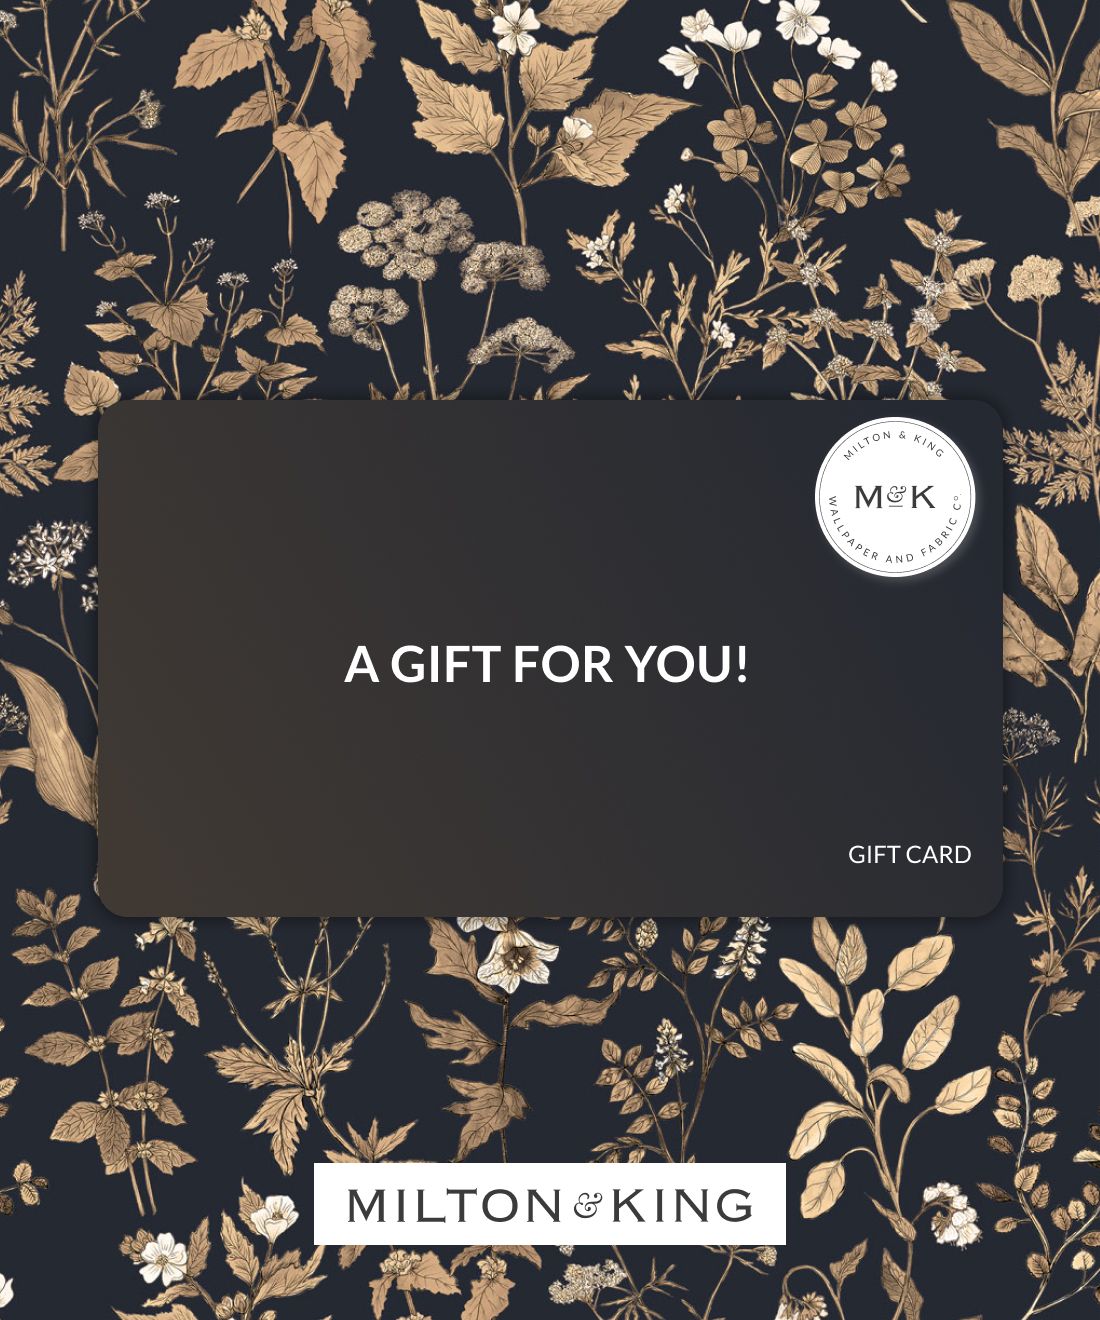 Milton & King - A Gift for you! Gift Card